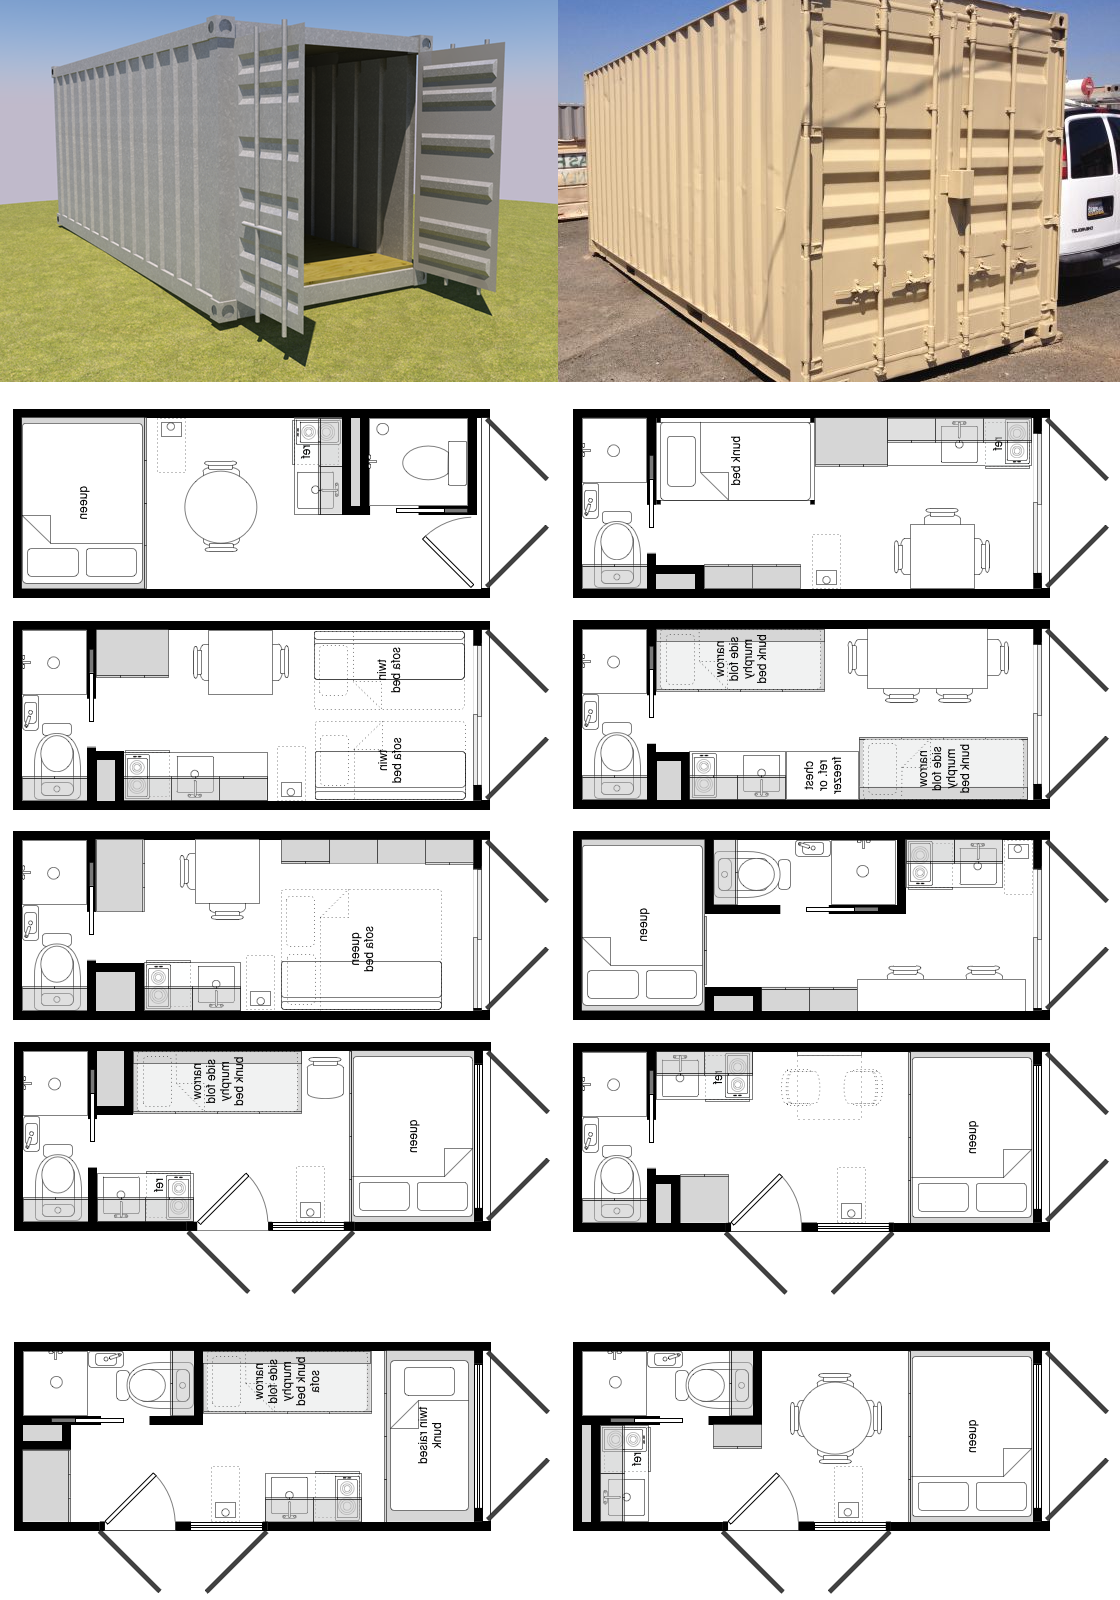 20 Foot Shipping Container Floor Plan Brainstorm Tiny